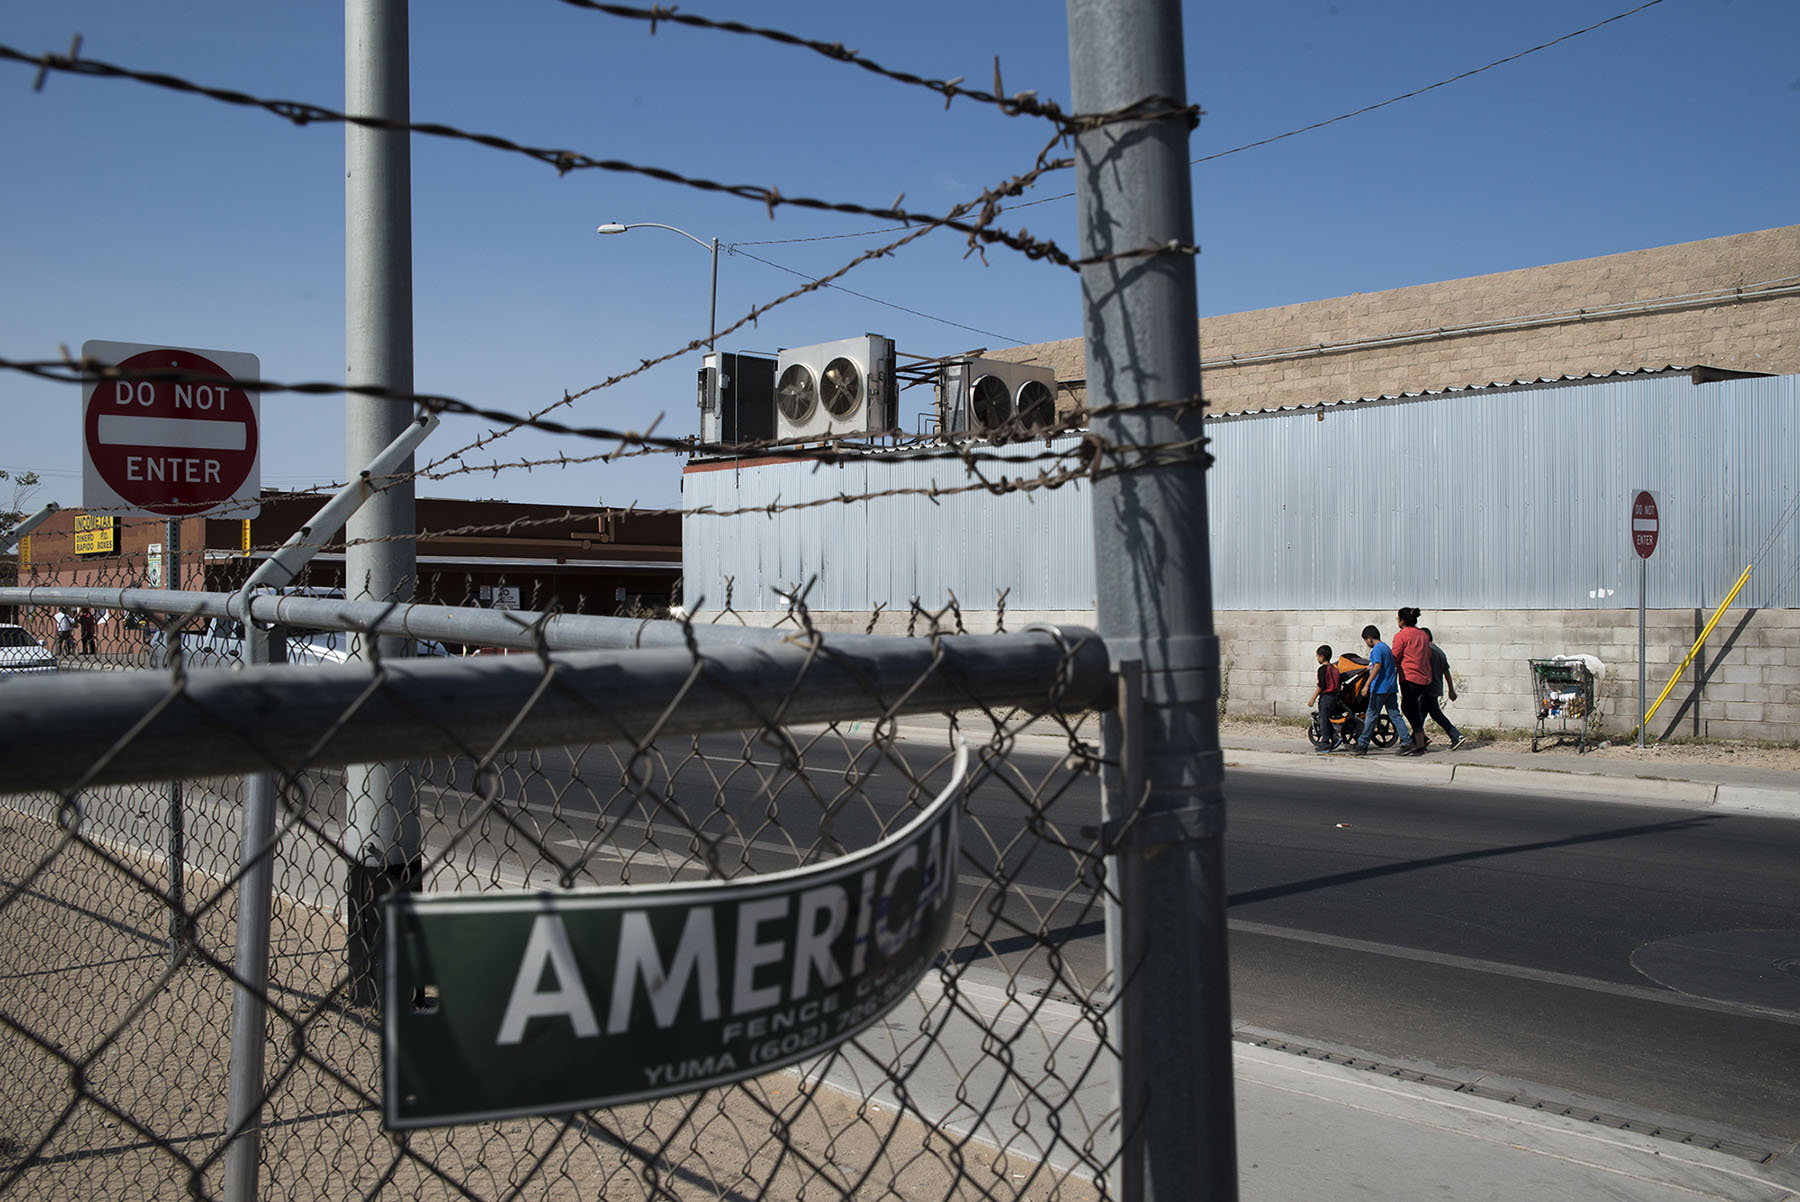 A total of 15.8 million people passed through the border crossing in San Luis, Arizona, in 2015. (Roman Knertser/News21)